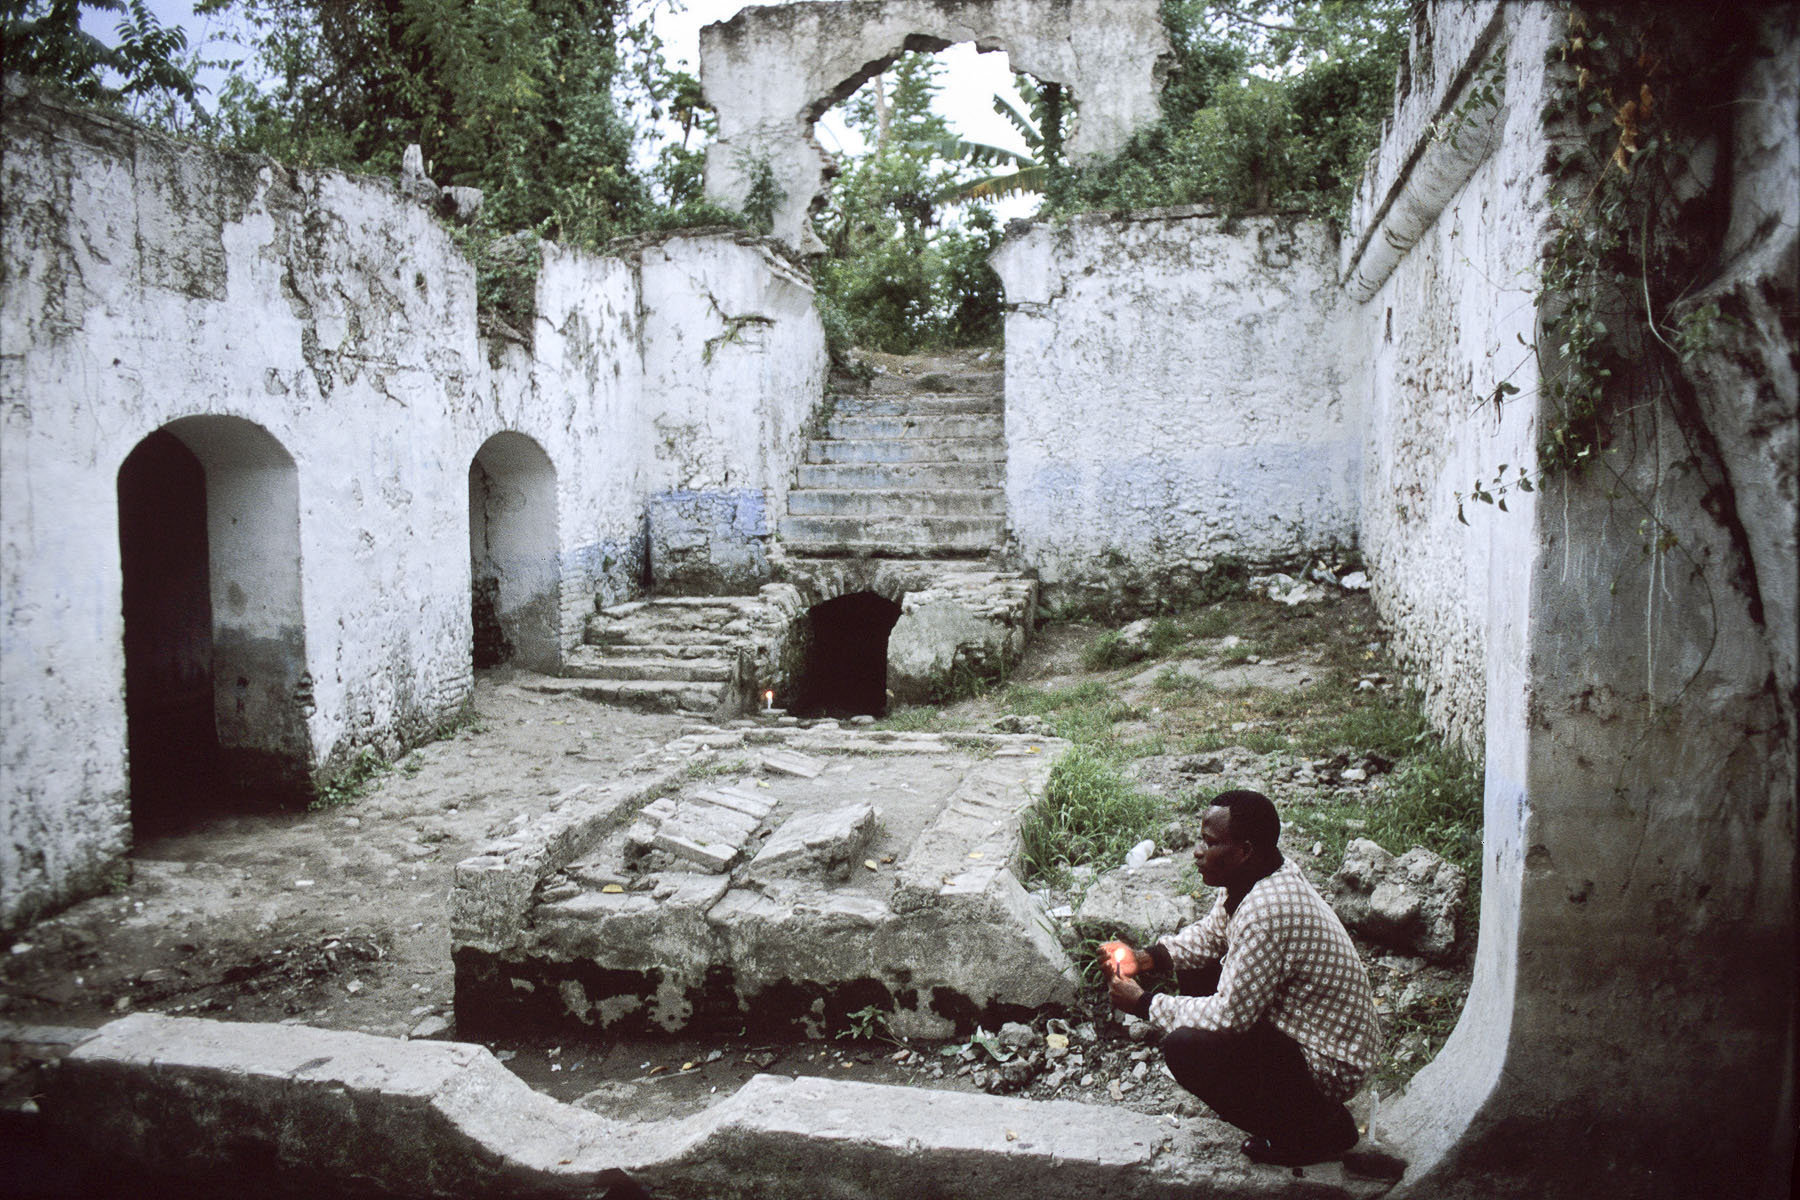 In the ruins of the Duplaa estate, a former plantation, a voodoo adept prays to  Lovana, a voodoo spirit and the new mistress of the house in October 2003